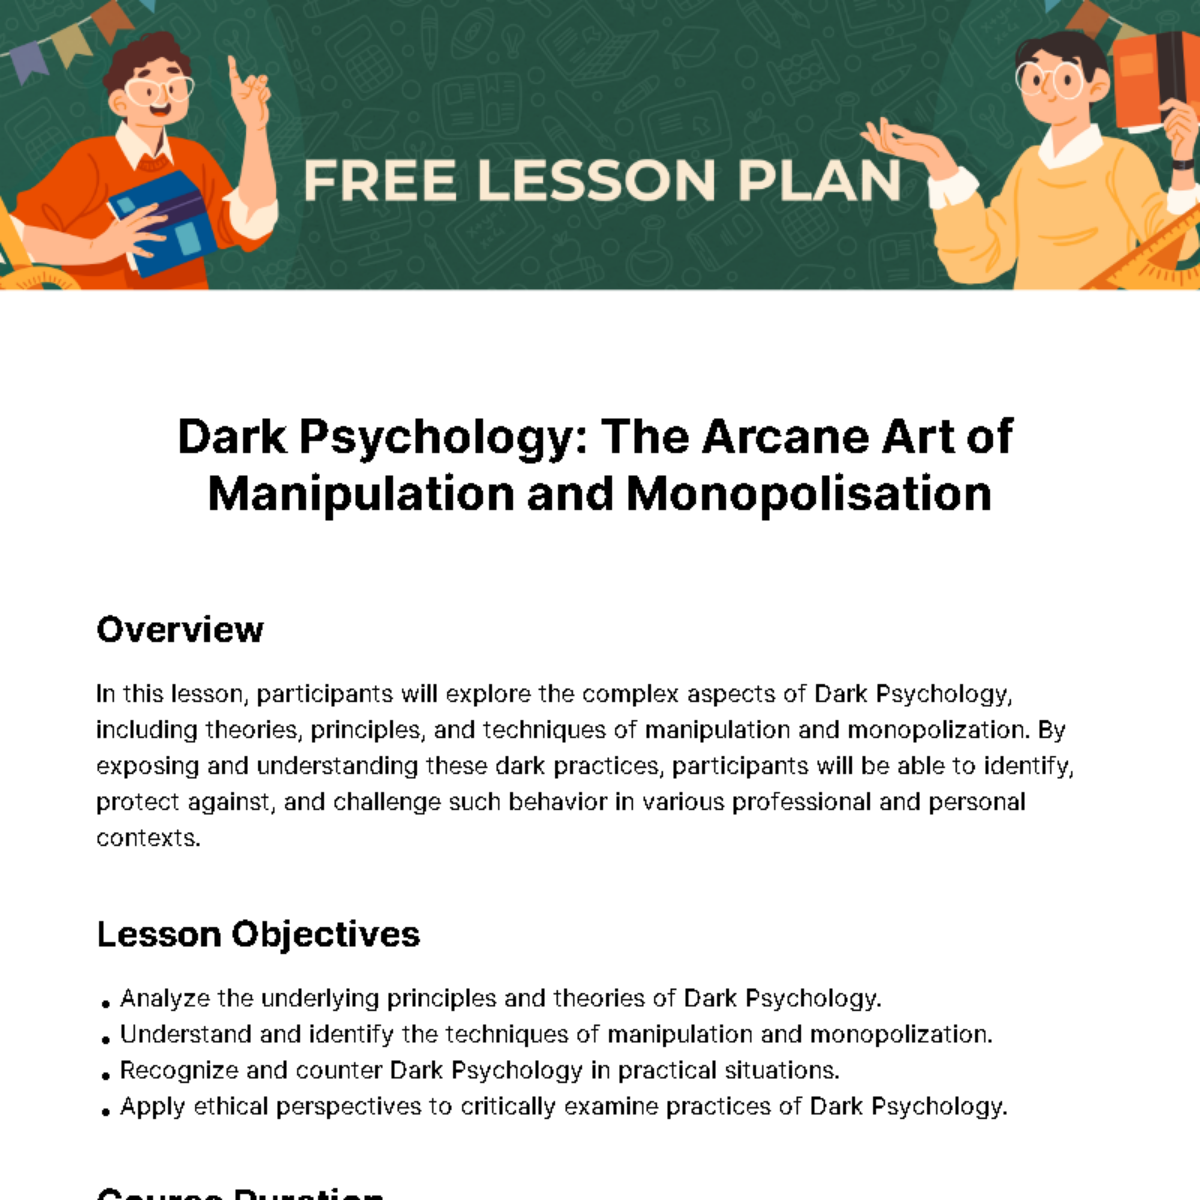 Free Lesson Plan Template